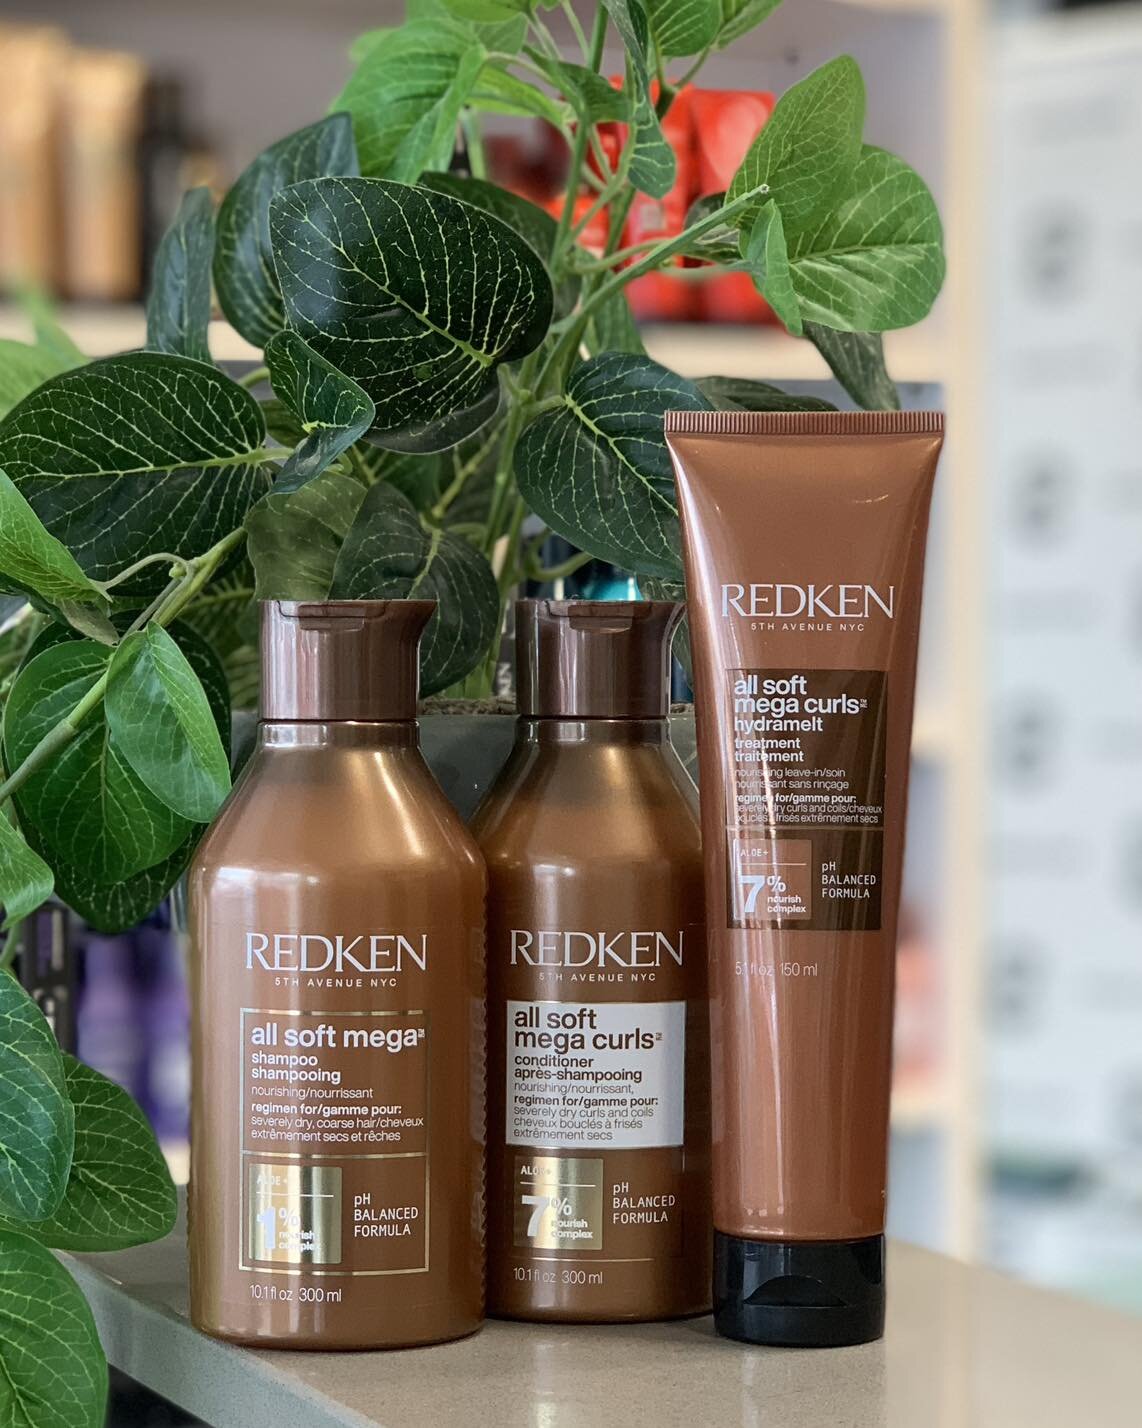 Redken All Soft Mega Curls!
Redken&rsquo;s newest curl range locks in the moisture, provides smoothness and softness all day long, detangles, moisturises, strengthens and improves manageability leaving bouncy, defined curls!! 🌿🌸

#redken #curly #ha